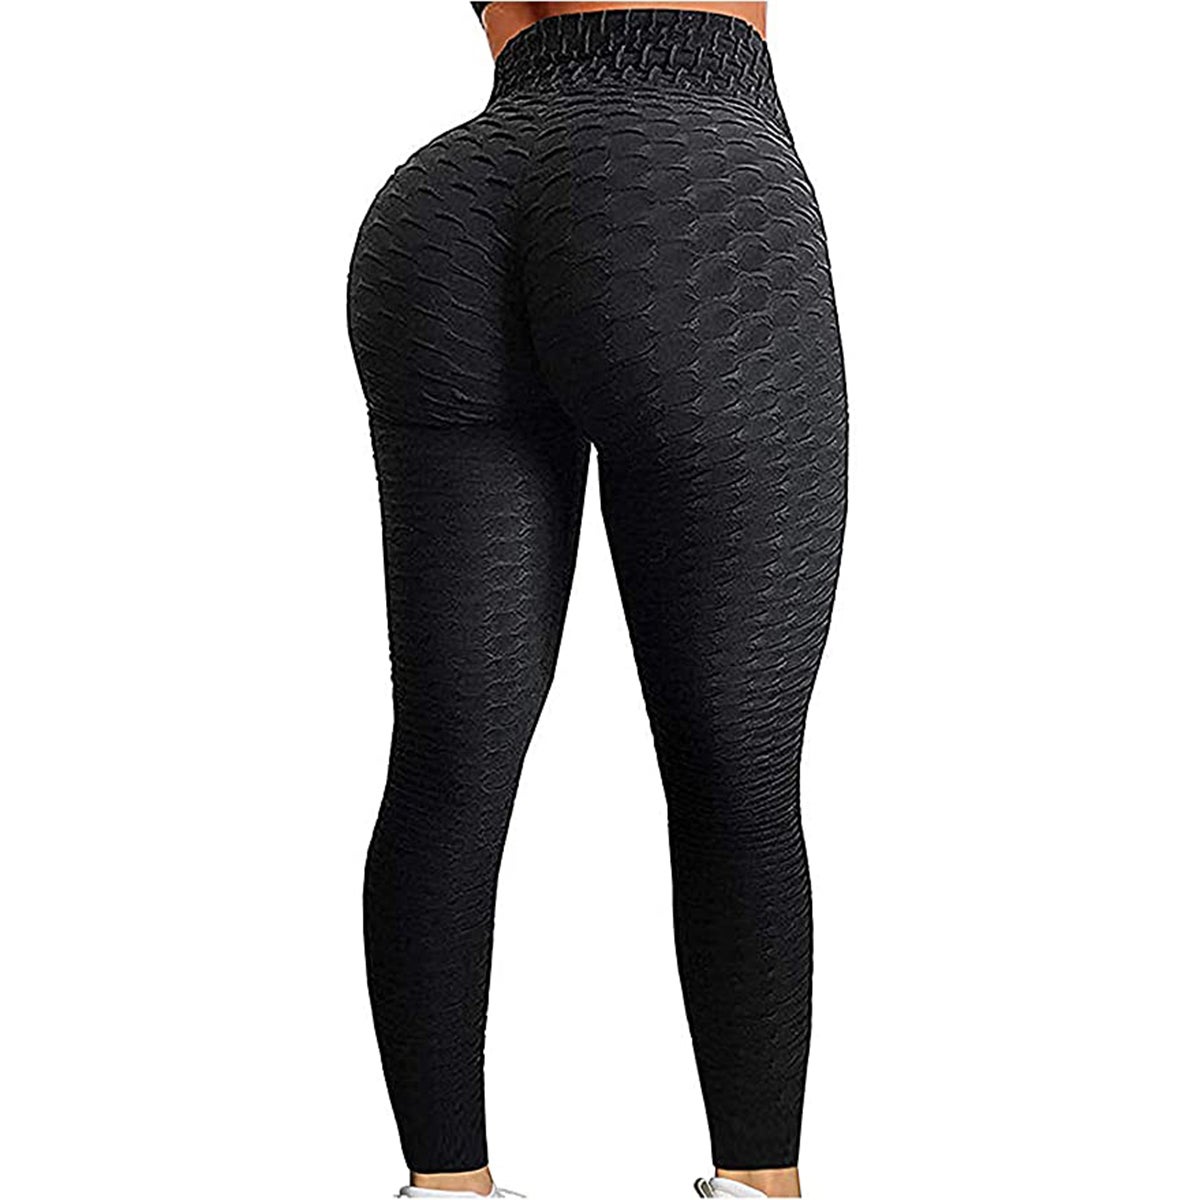 Qoq Womens High Waist Yoga Pants Tummy Control Slimming Textured Booty Leggings Workout Ruched